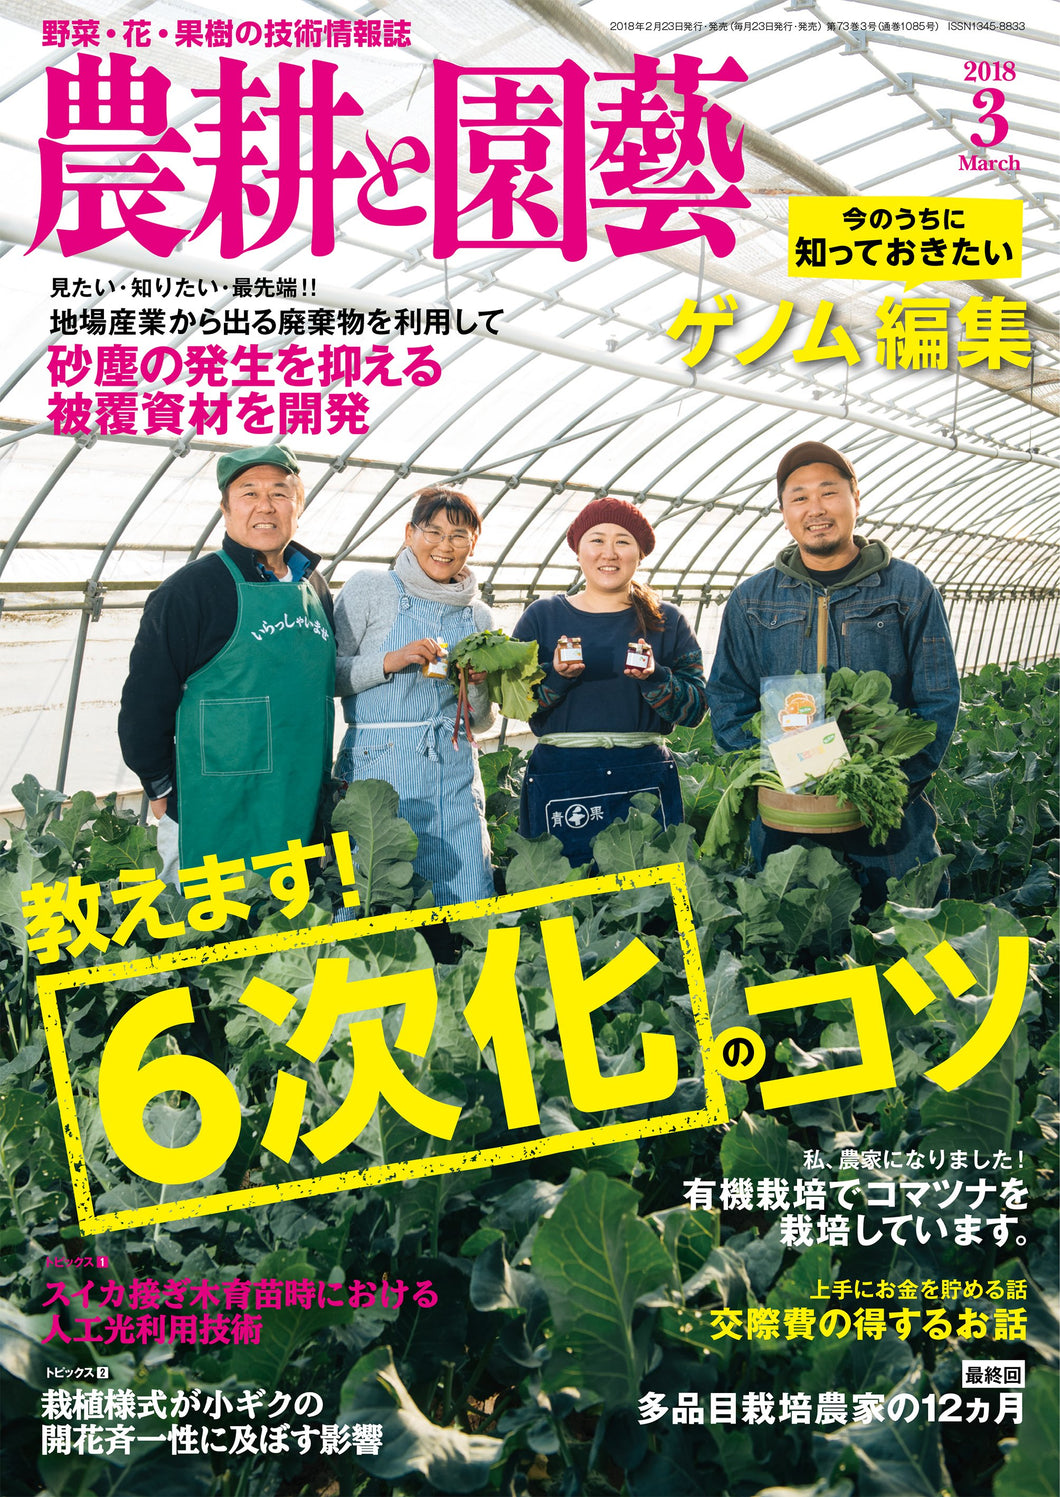 Agriculture and Horticulture March 2018